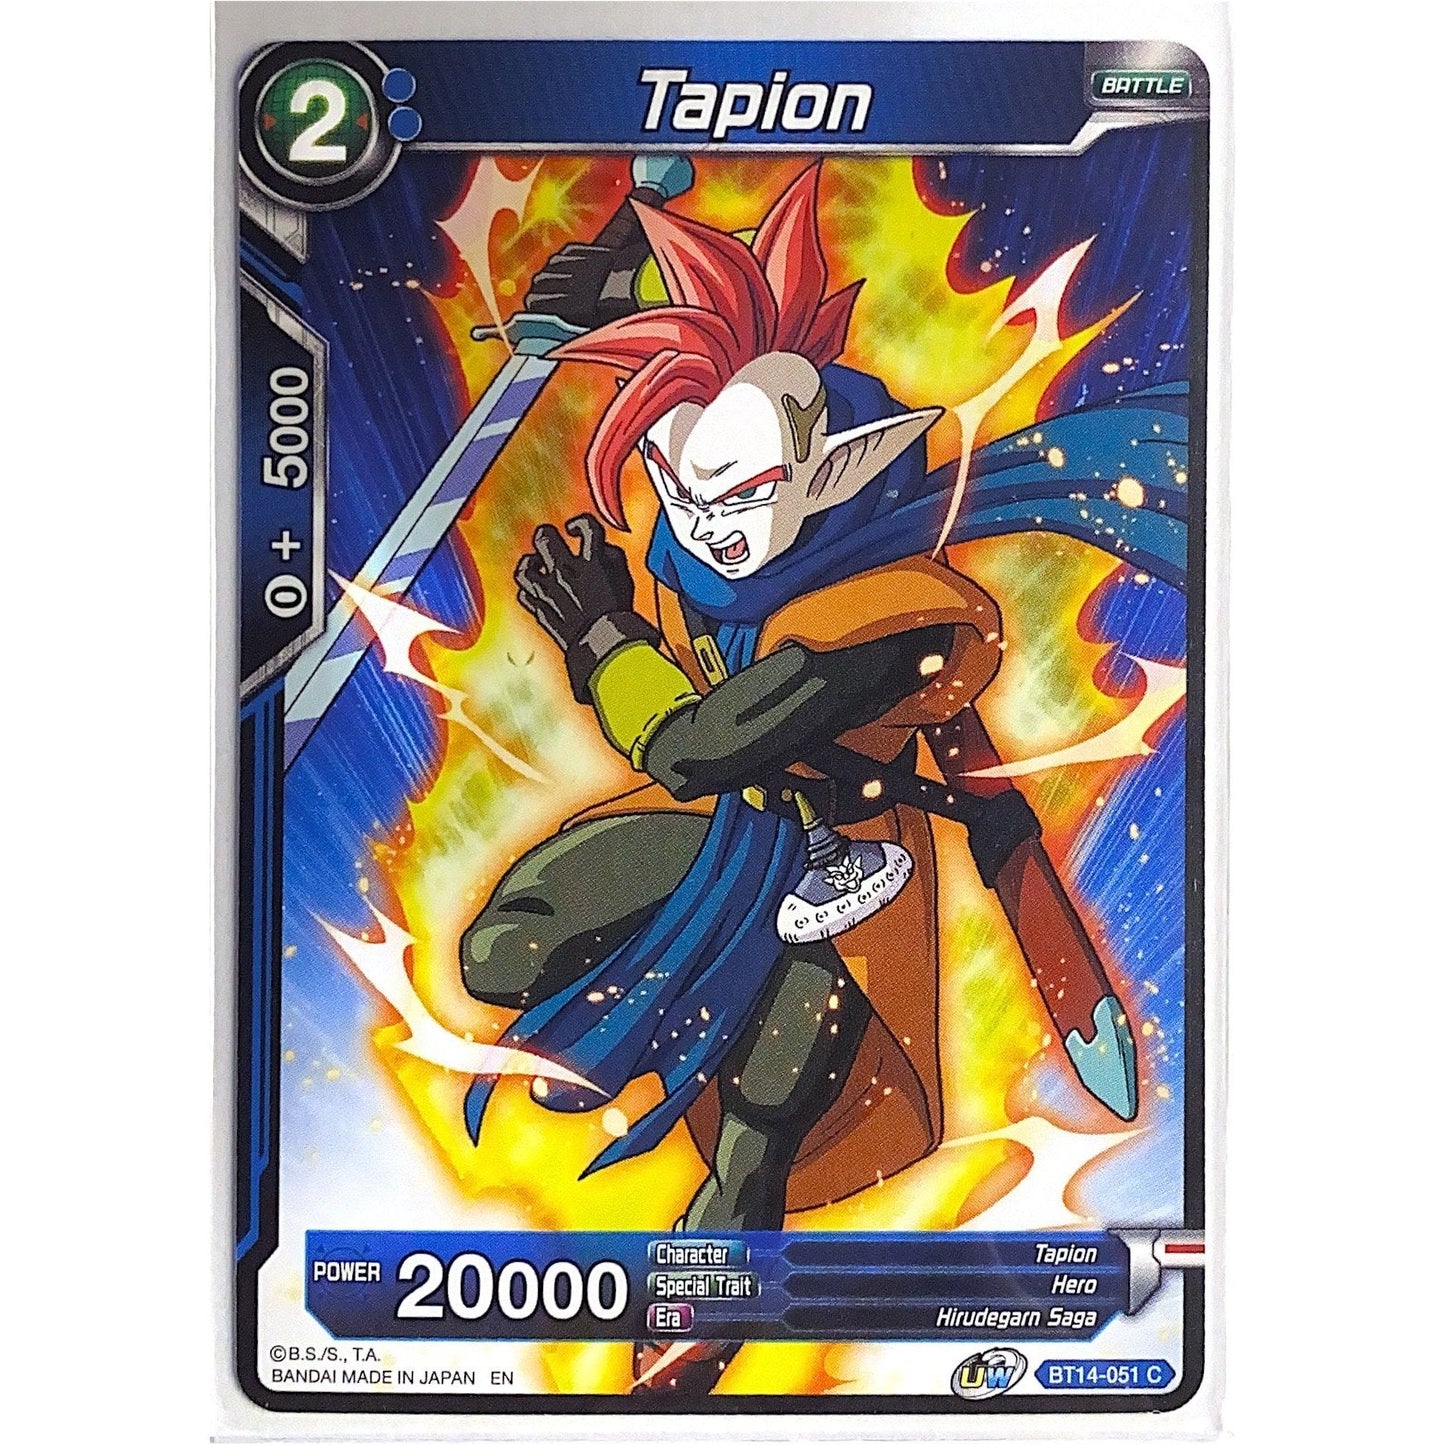  Dragon Ball Super Tapion BT14-051  Local Legends Cards & Collectibles